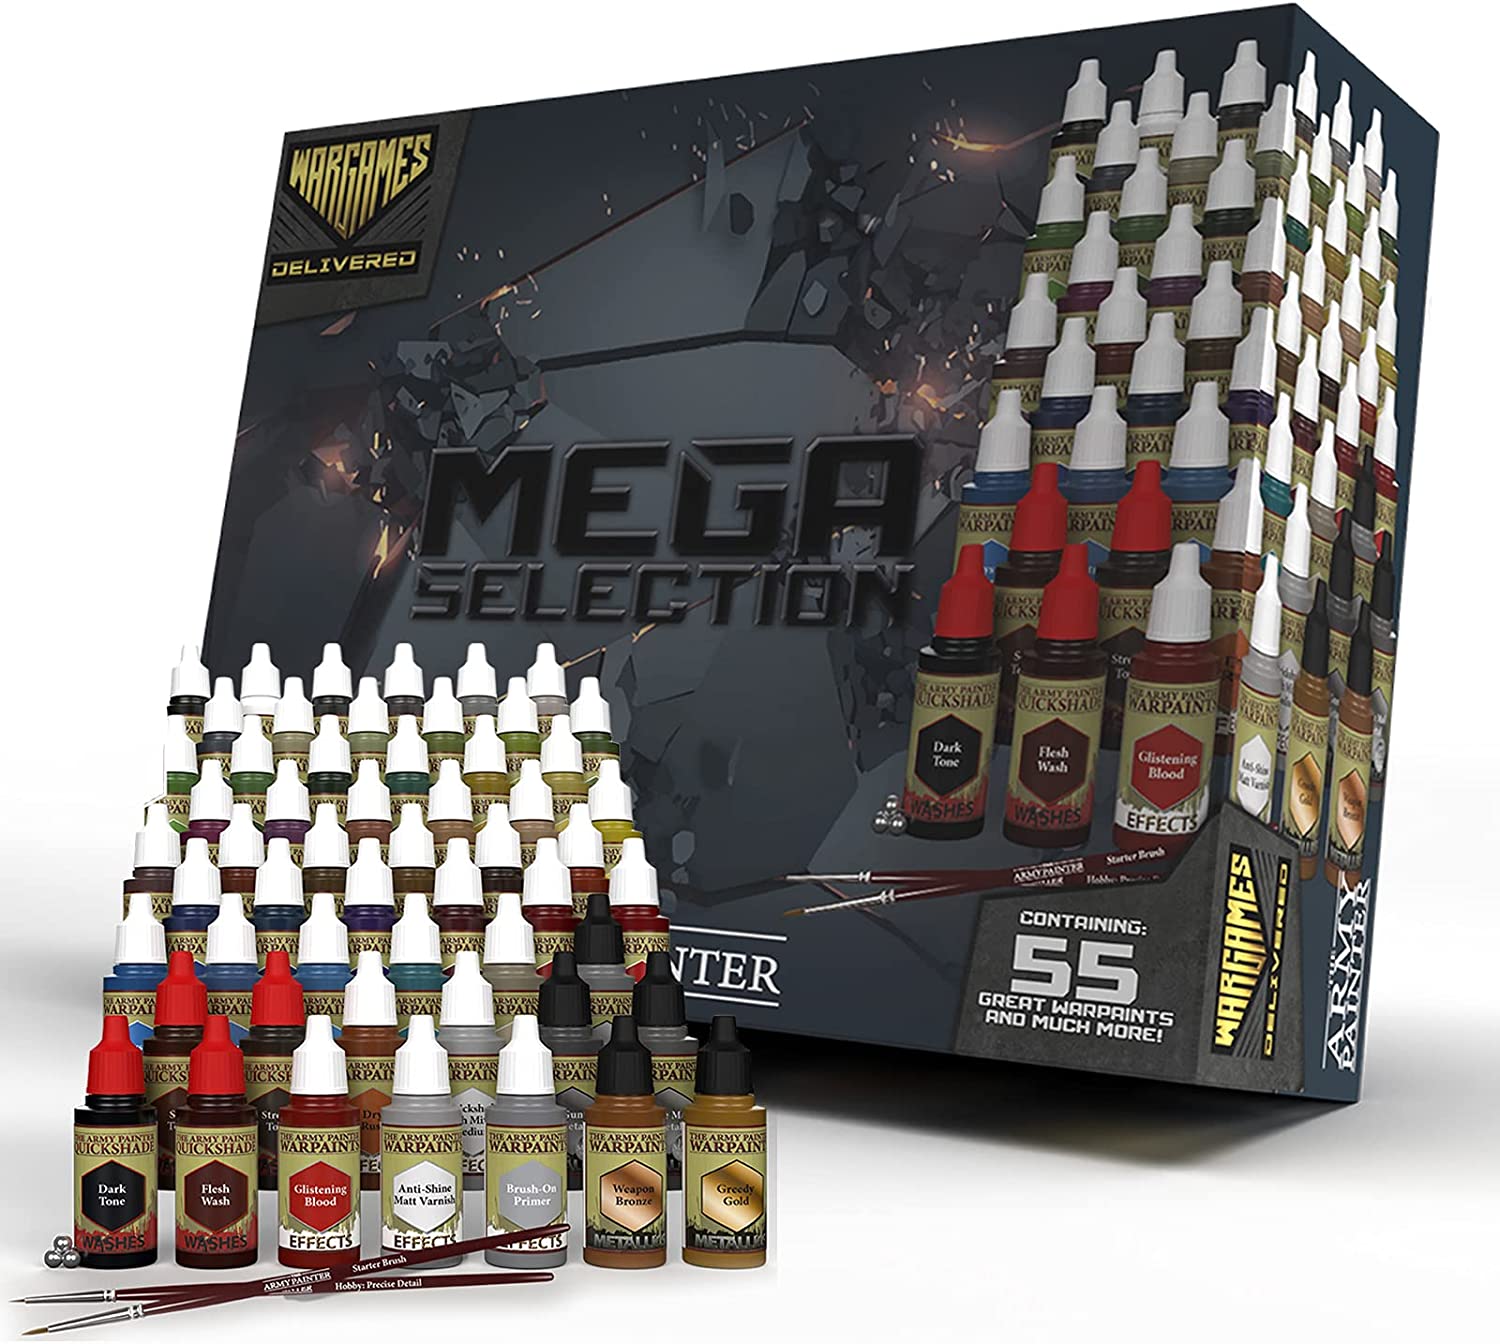 Army Painter Unboxing: Mega Paint Set – OnTableTop – Home of Beasts of War